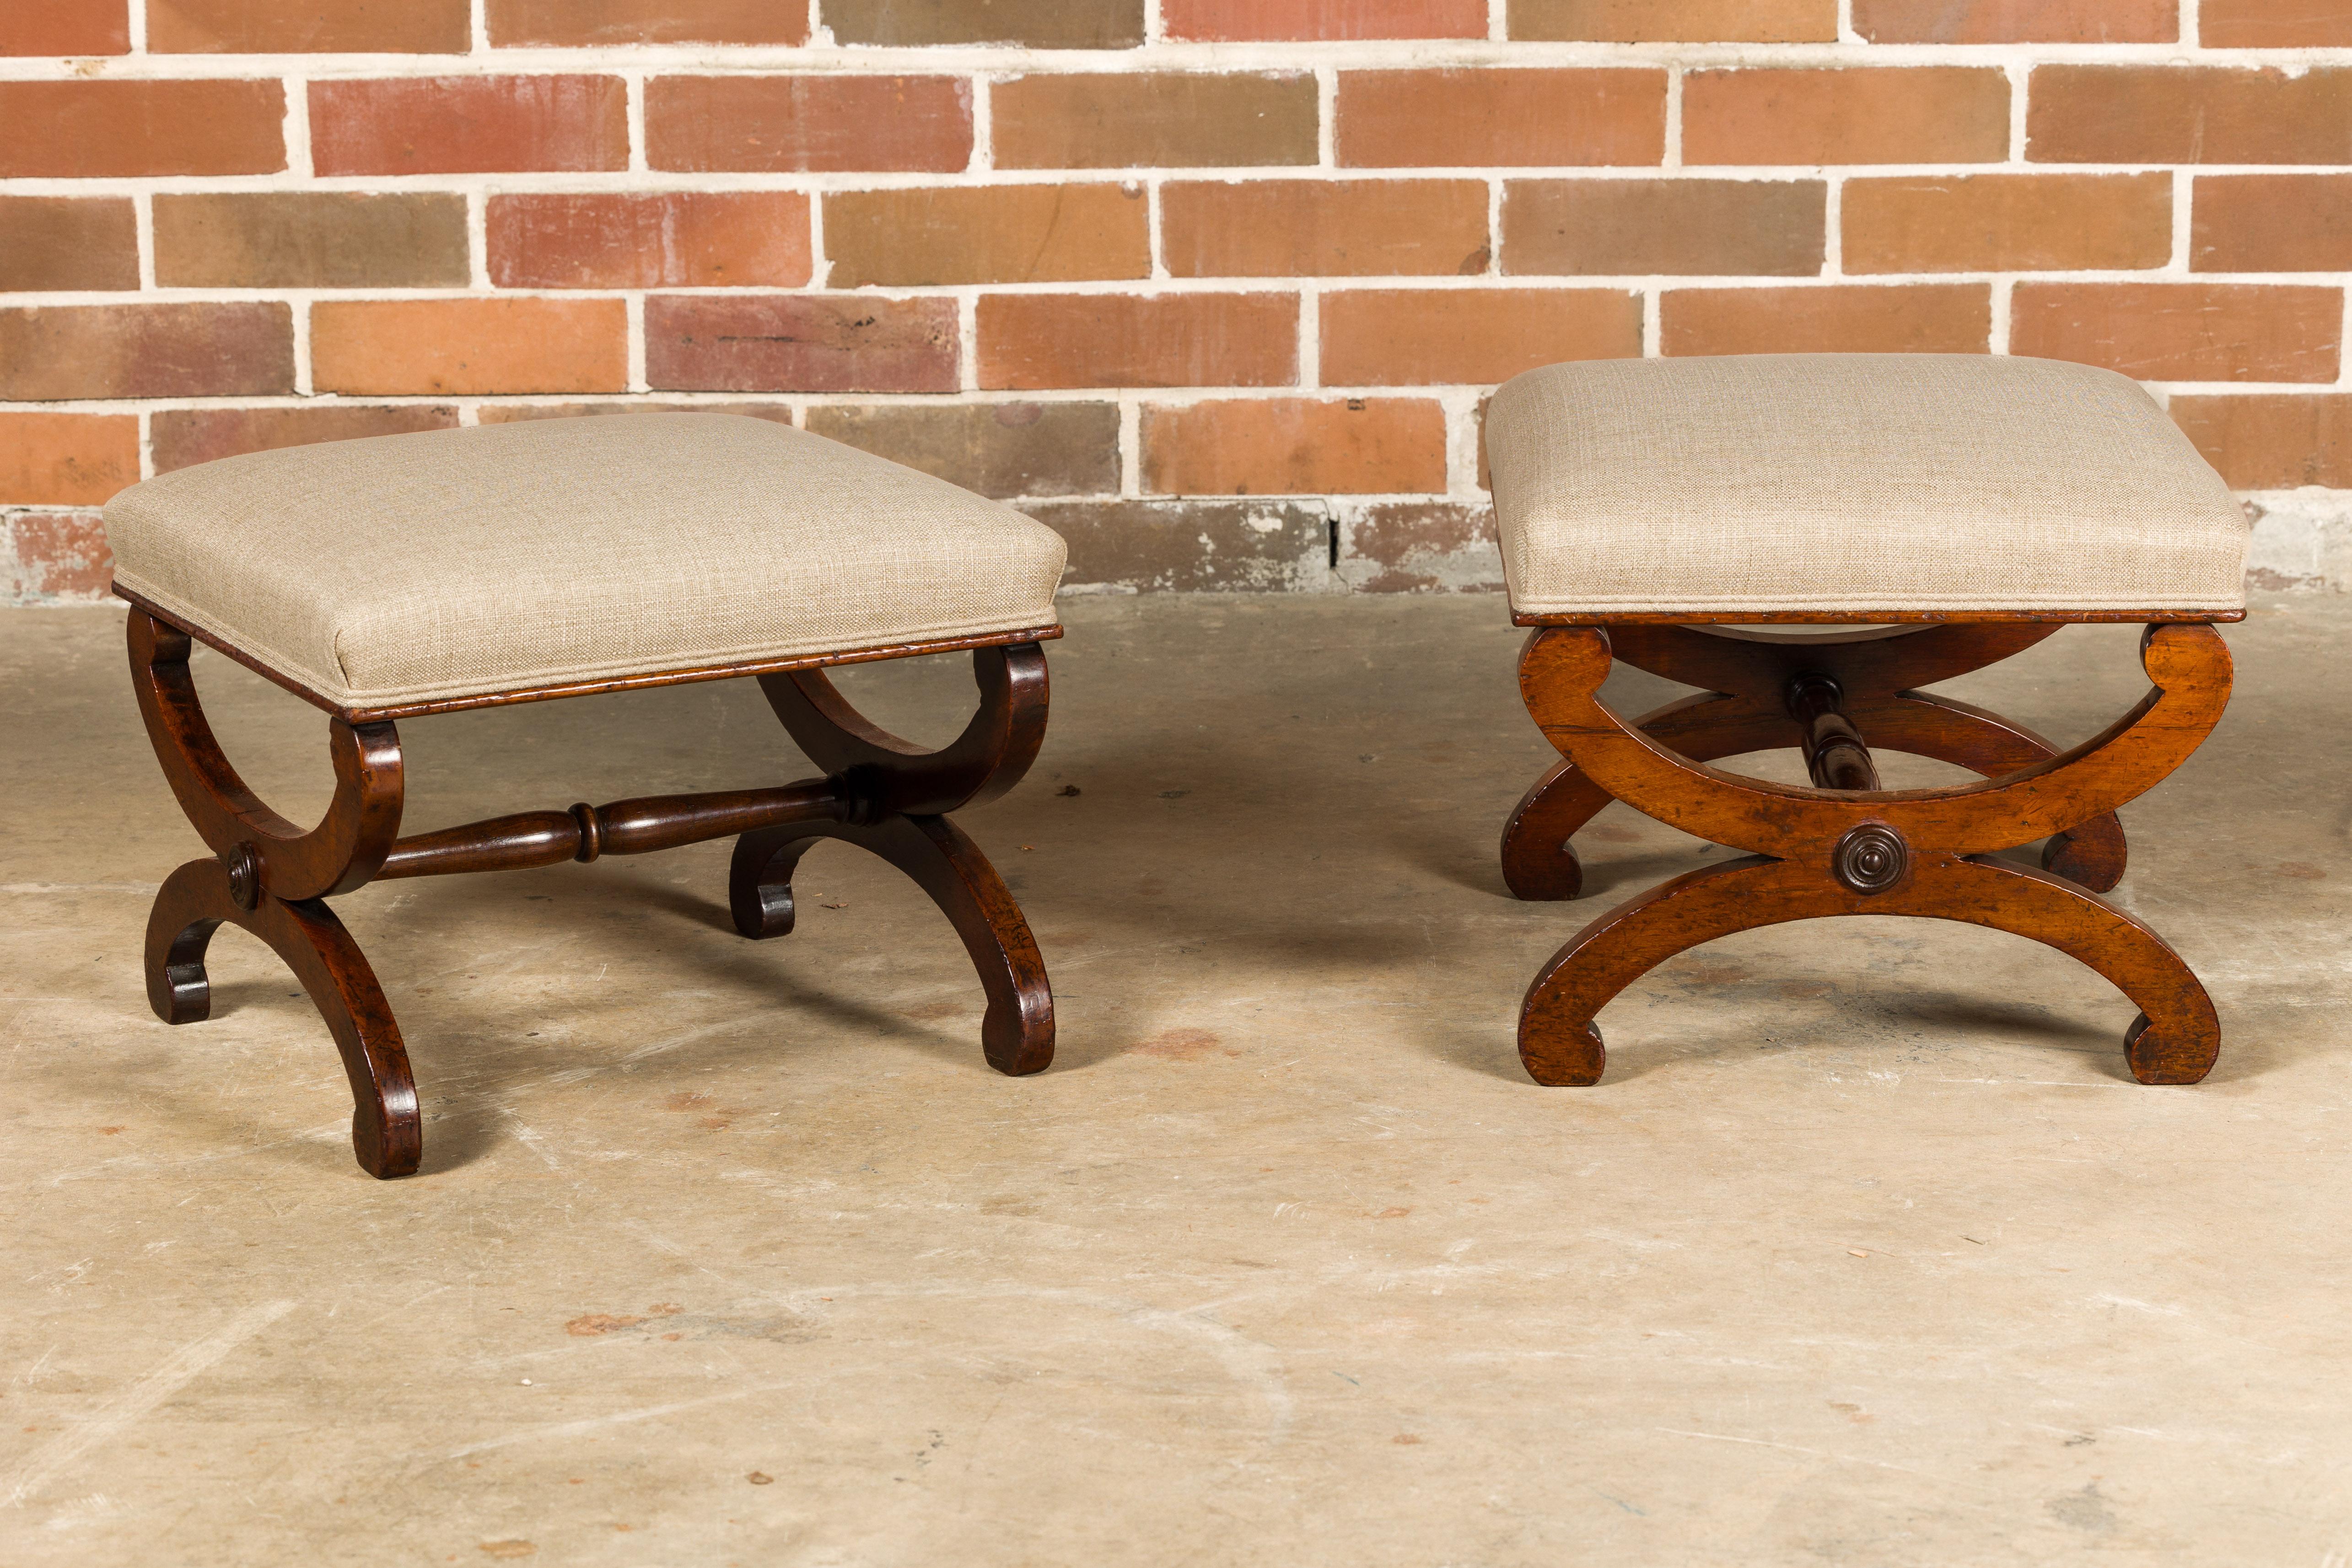 A pair of Biedermeier period walnut stools from the 19th century with X-Form bases, turned spindle shaped stretchers and upholstered seats. These 19th-century Biedermeier walnut stools are an embodiment of classic elegance and timeless design.